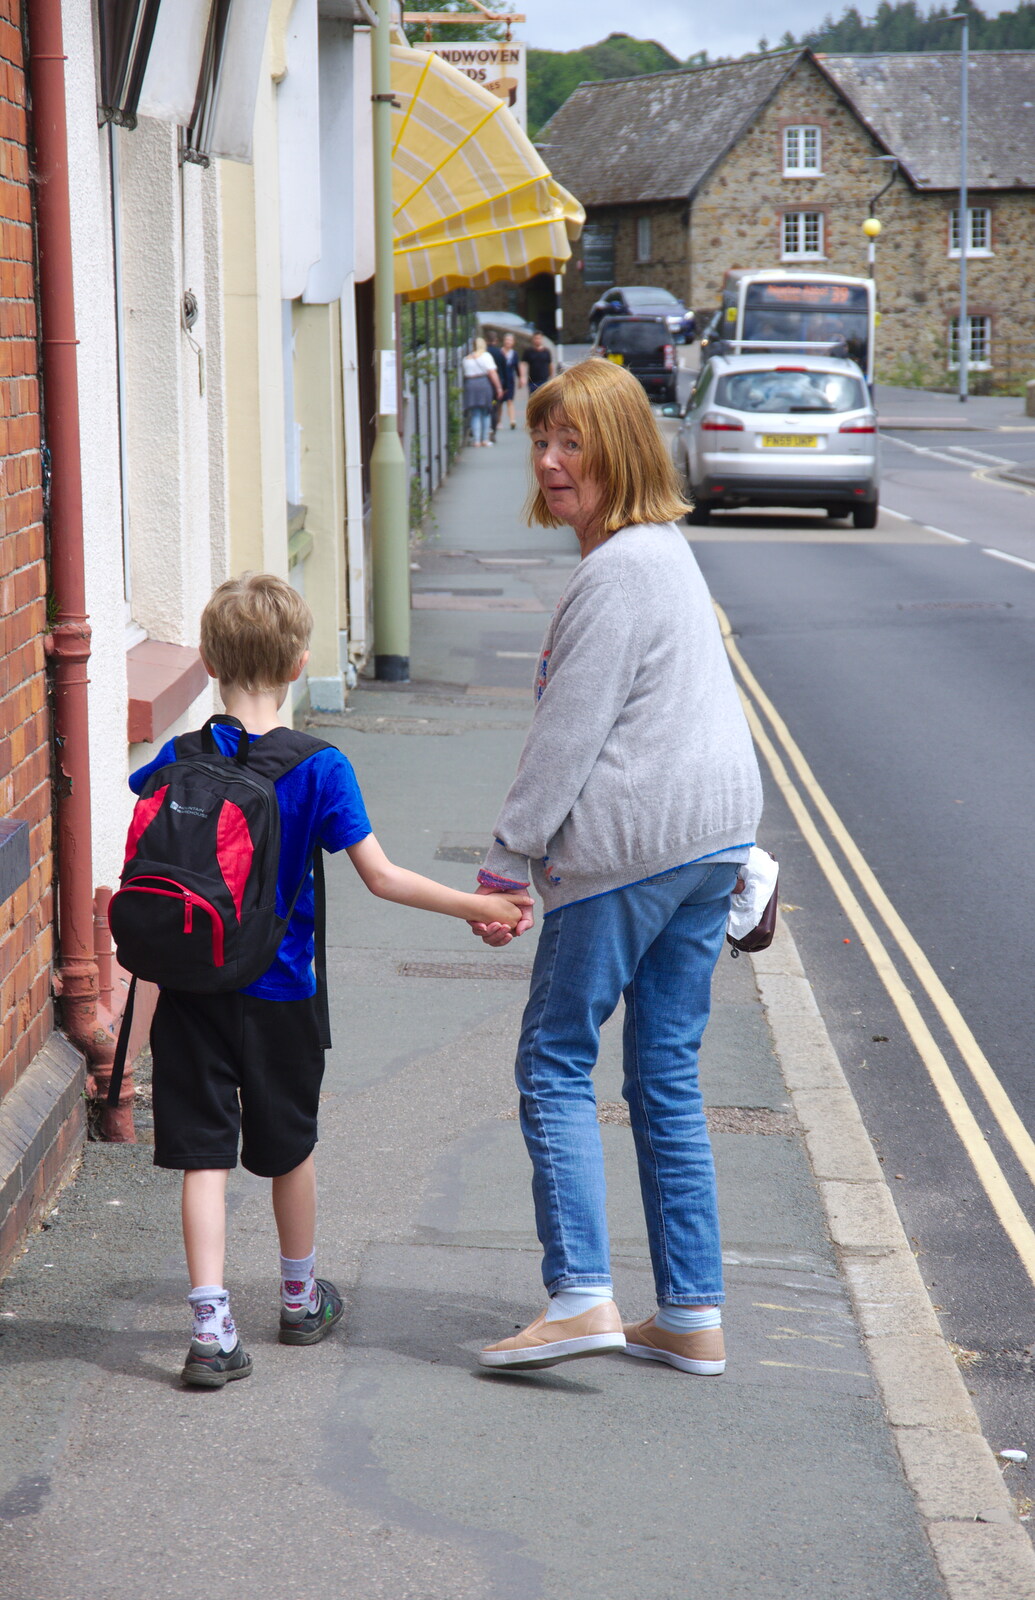 Harry and Grandma J from The Tom Cobley and a Return to Haytor, Bovey Tracey, Devon - 27th May 2019